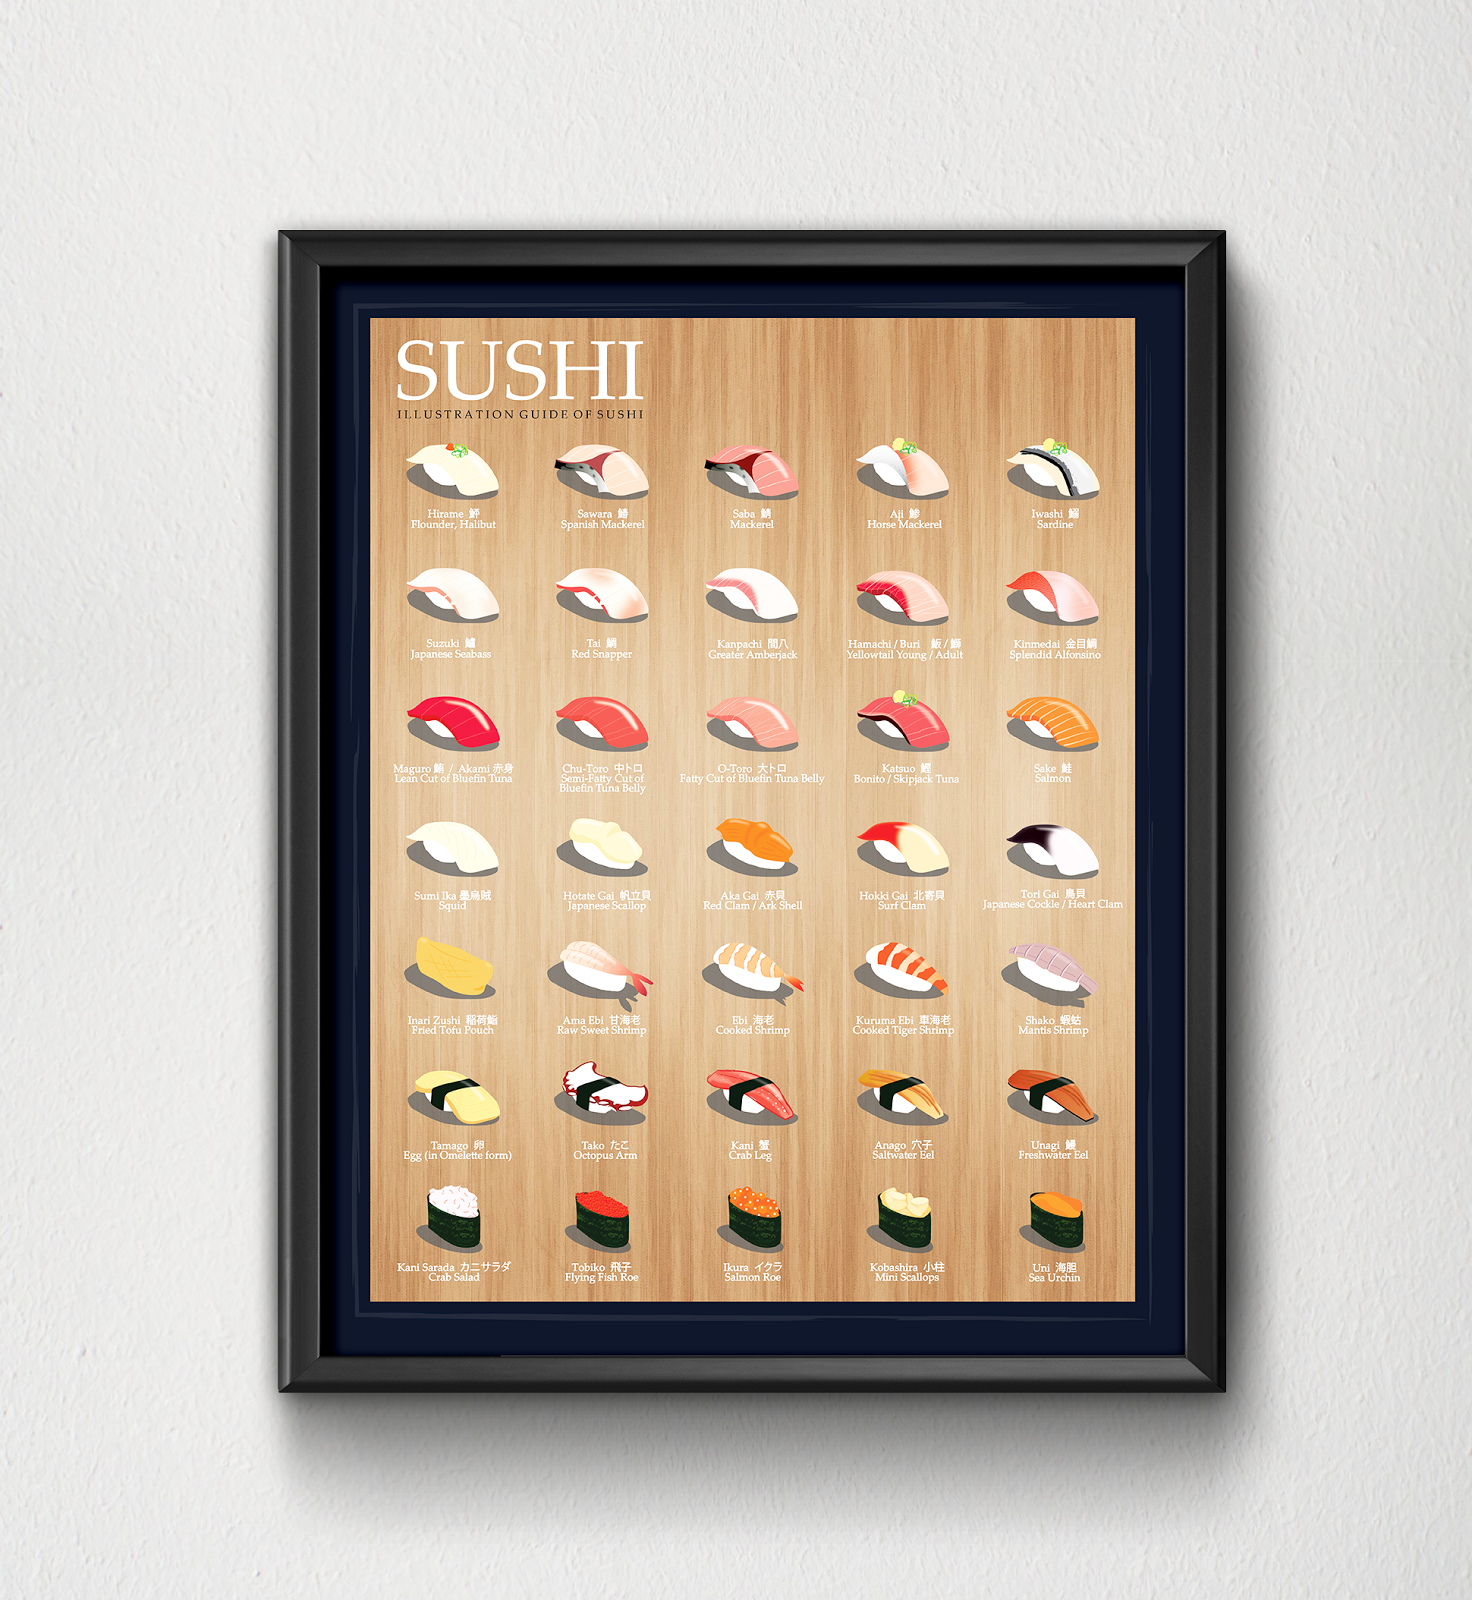 THE SUSHI POSTER